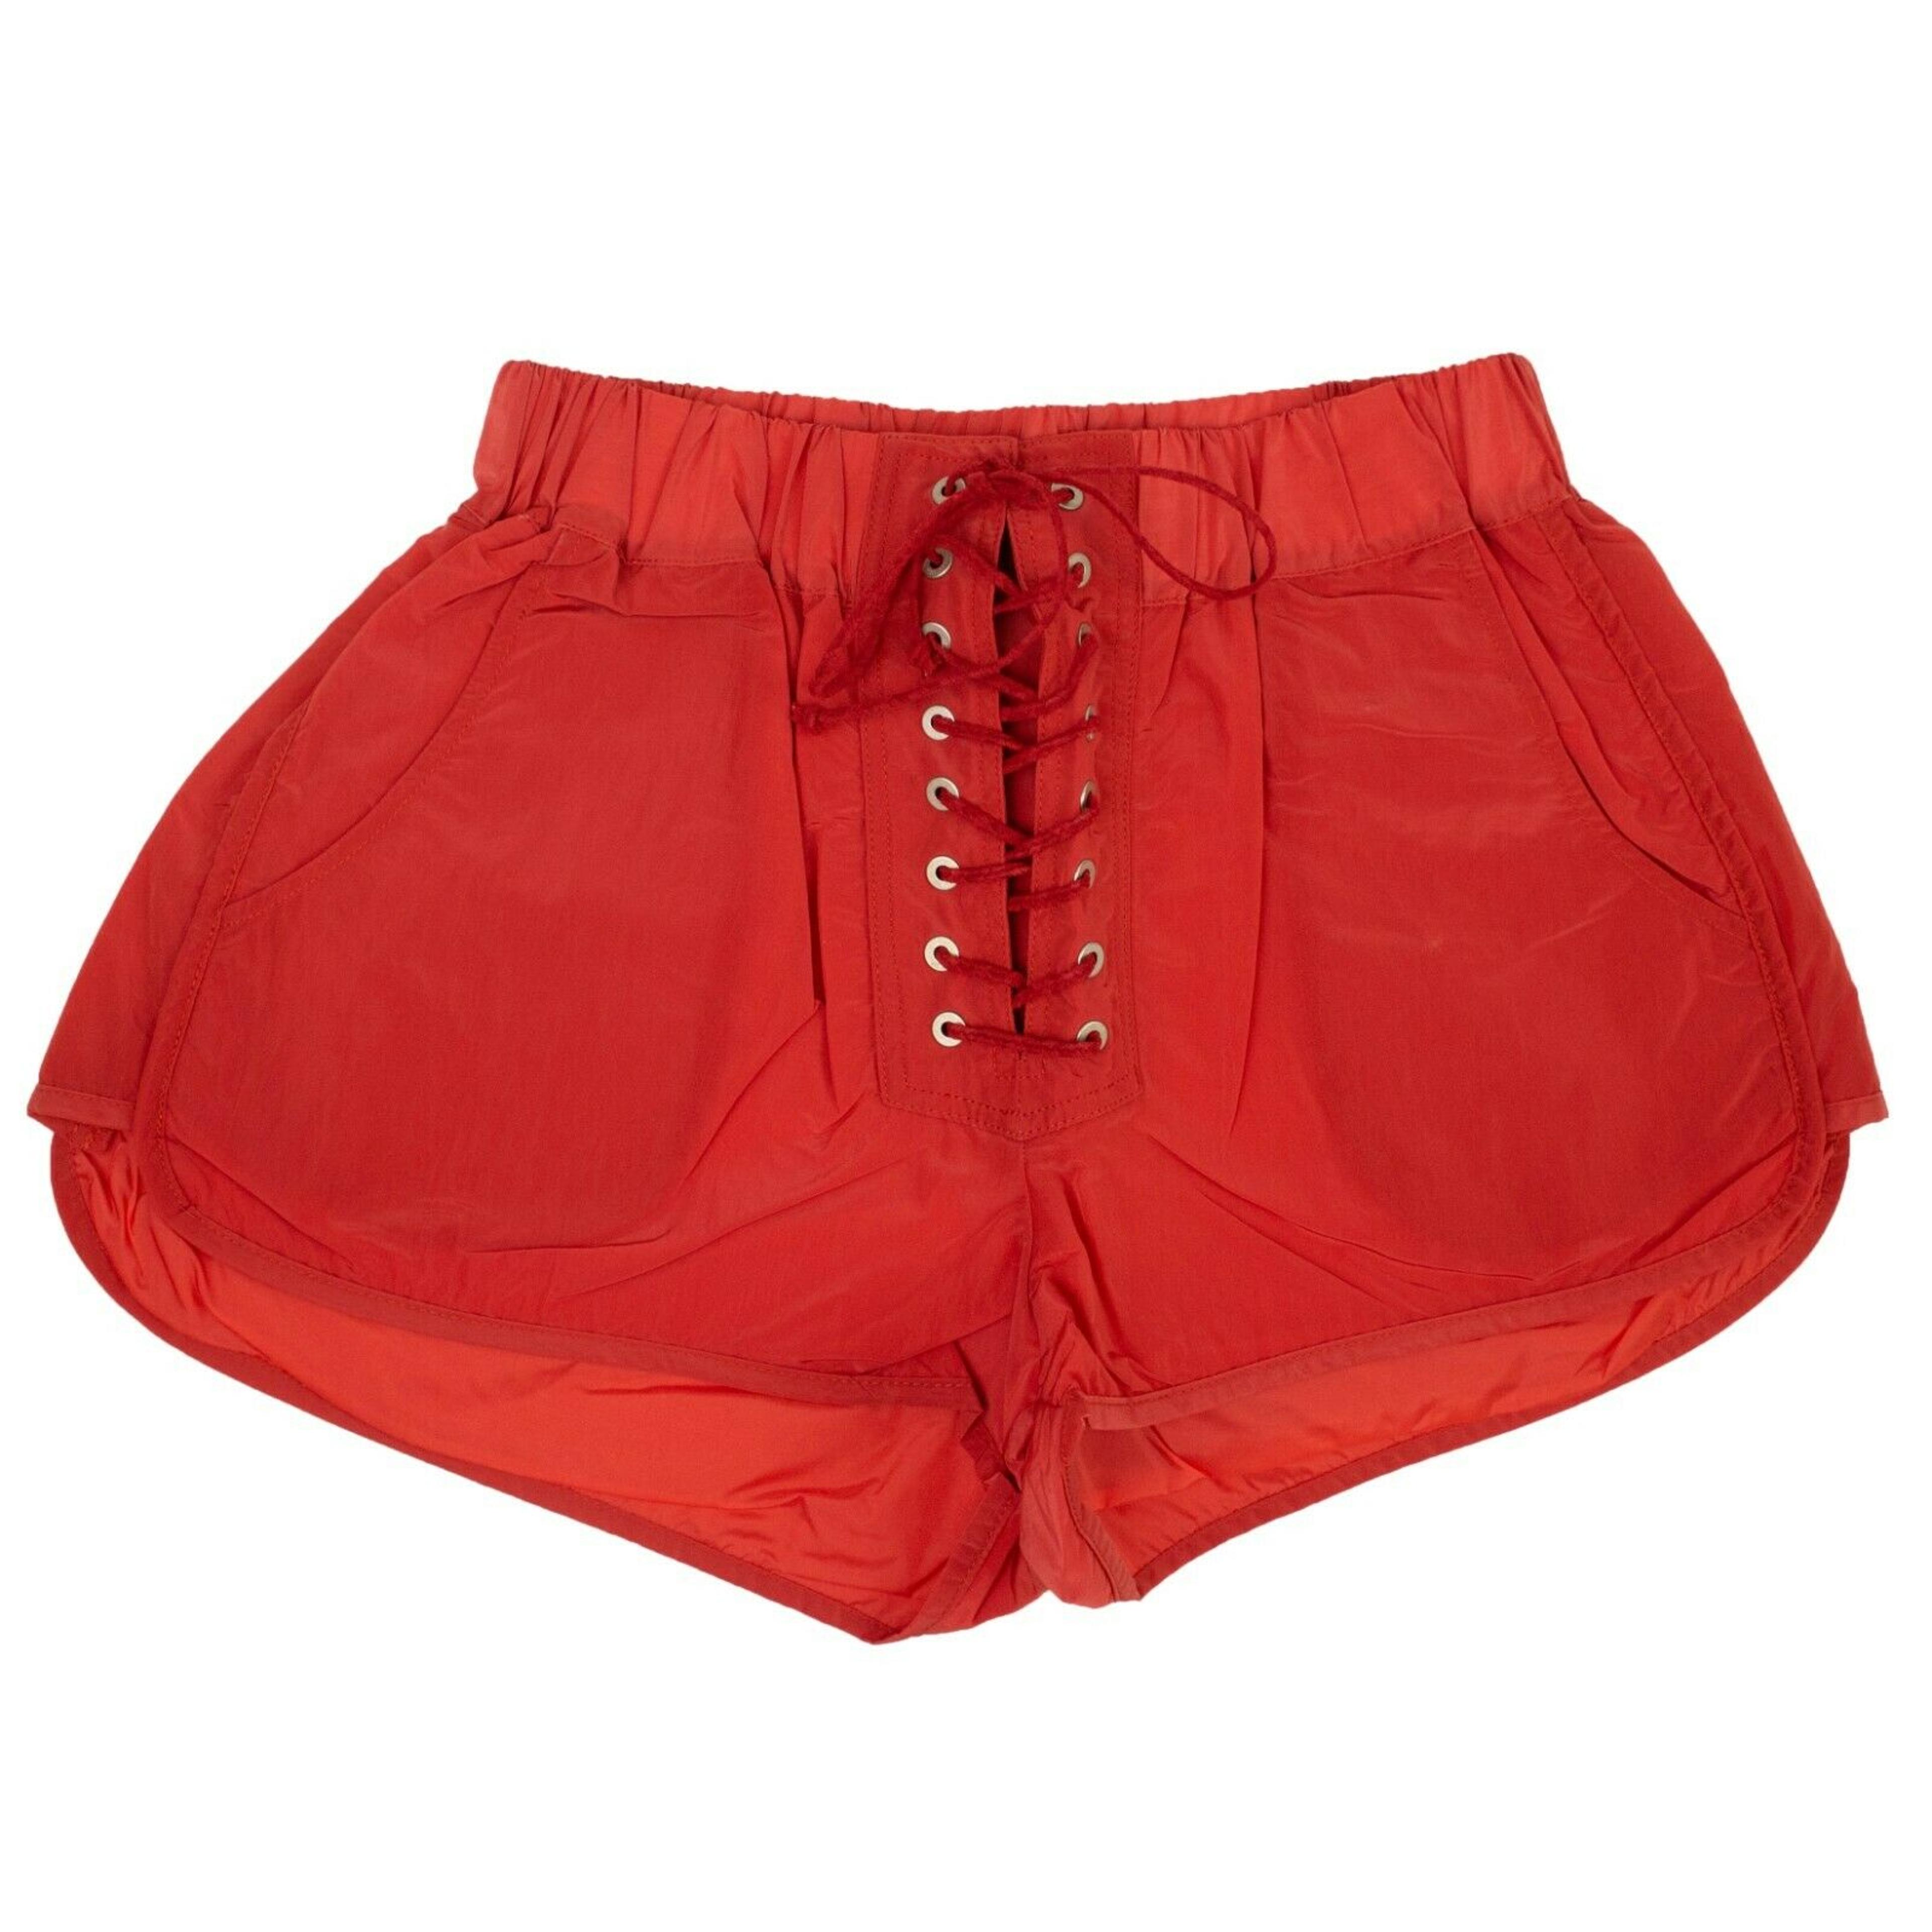 Red Lace Up Track Short Pants